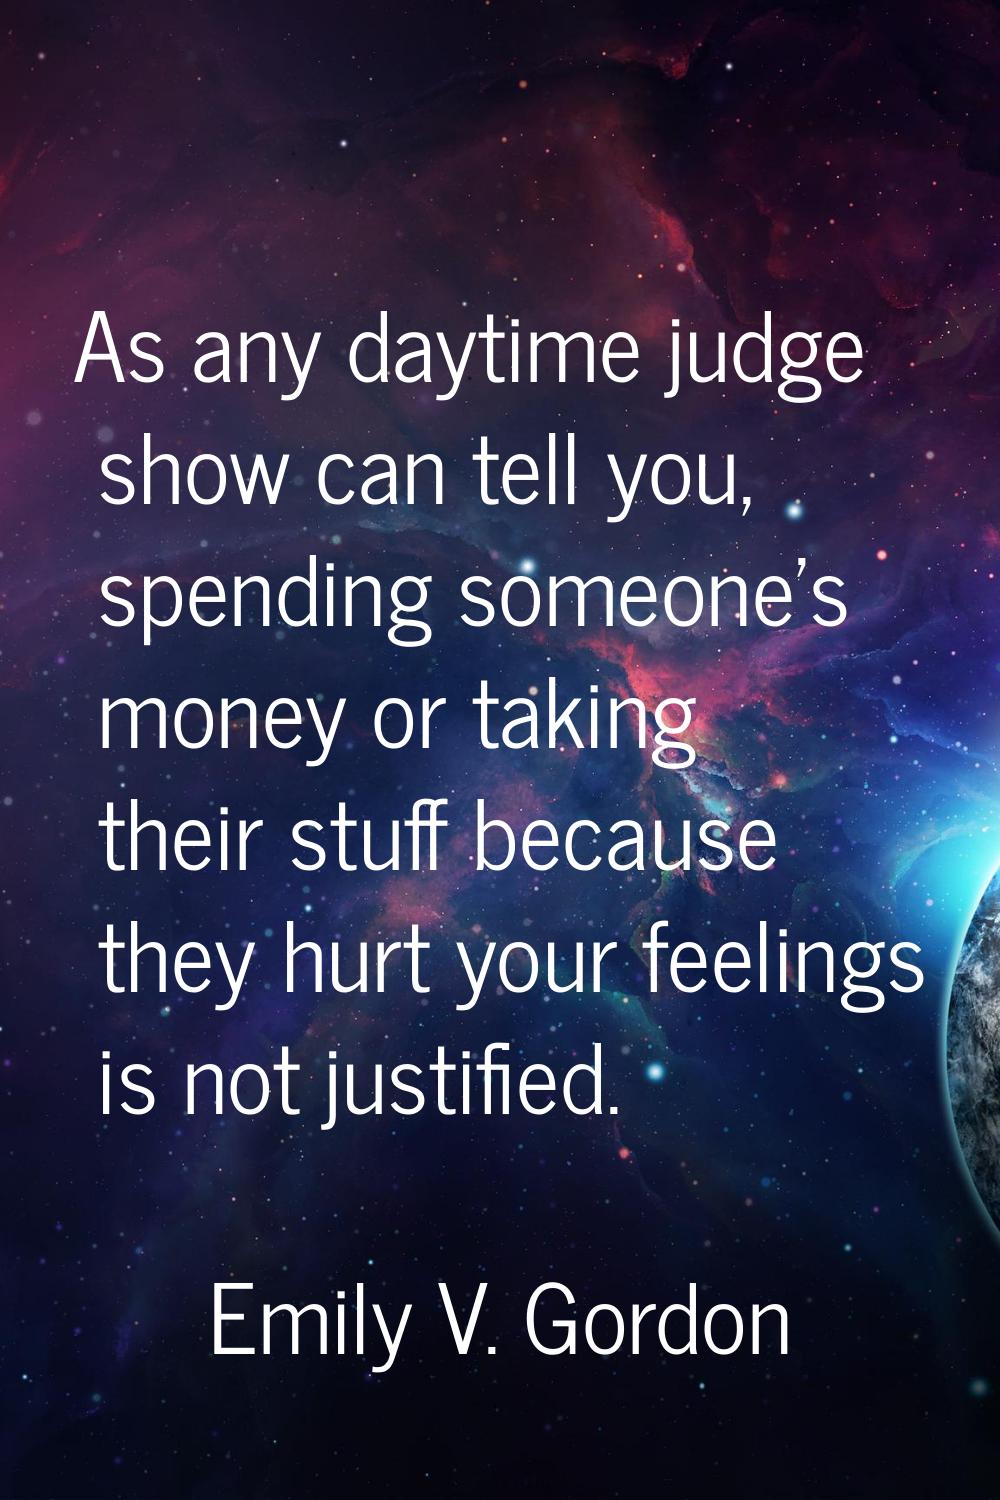 As any daytime judge show can tell you, spending someone's money or taking their stuff because they